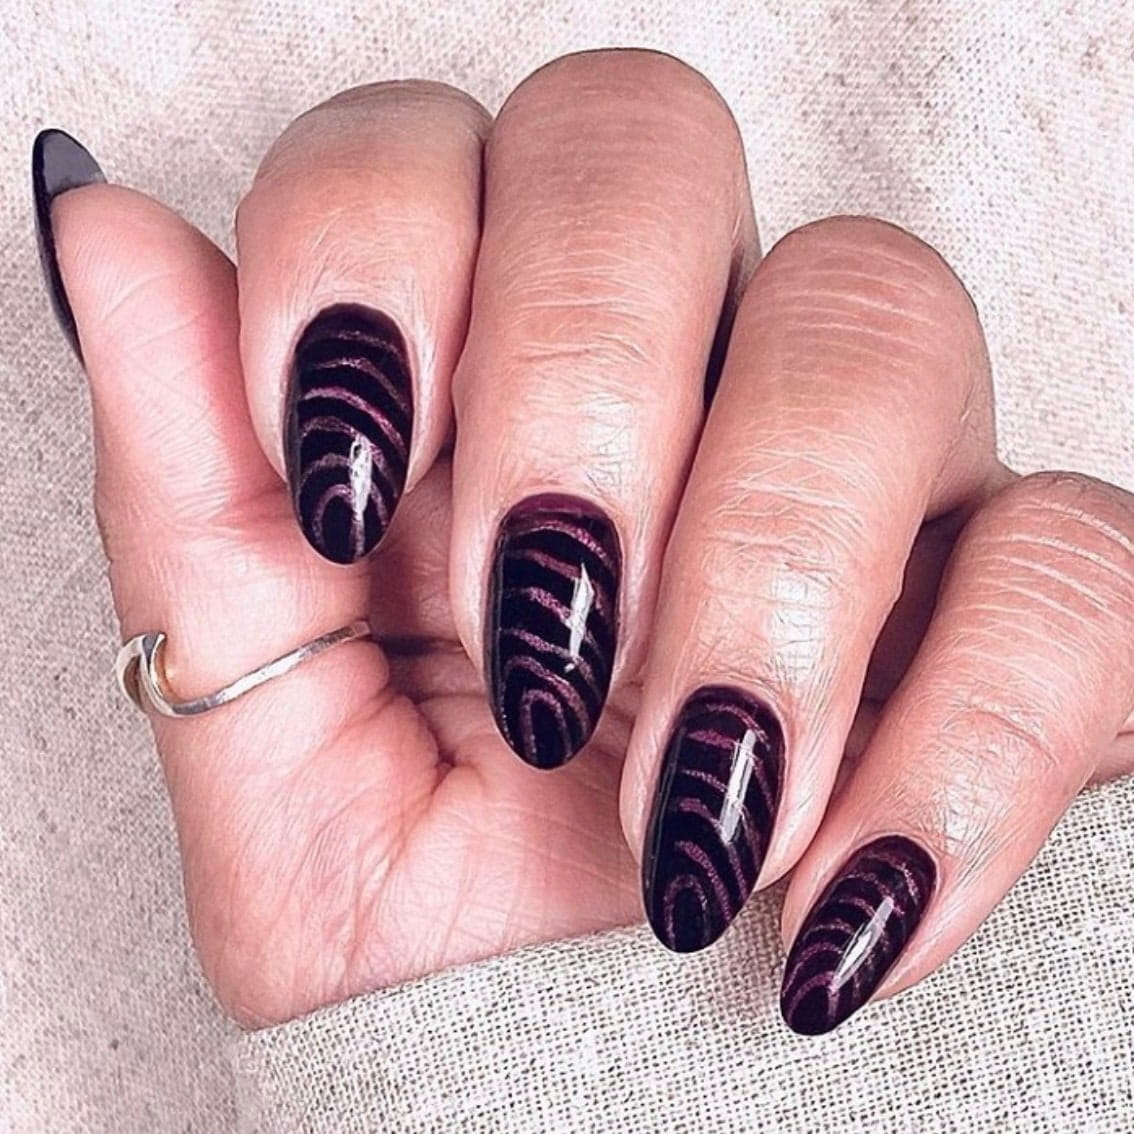 100+ Best Winter Nail Ideas And Designs To Try images 71